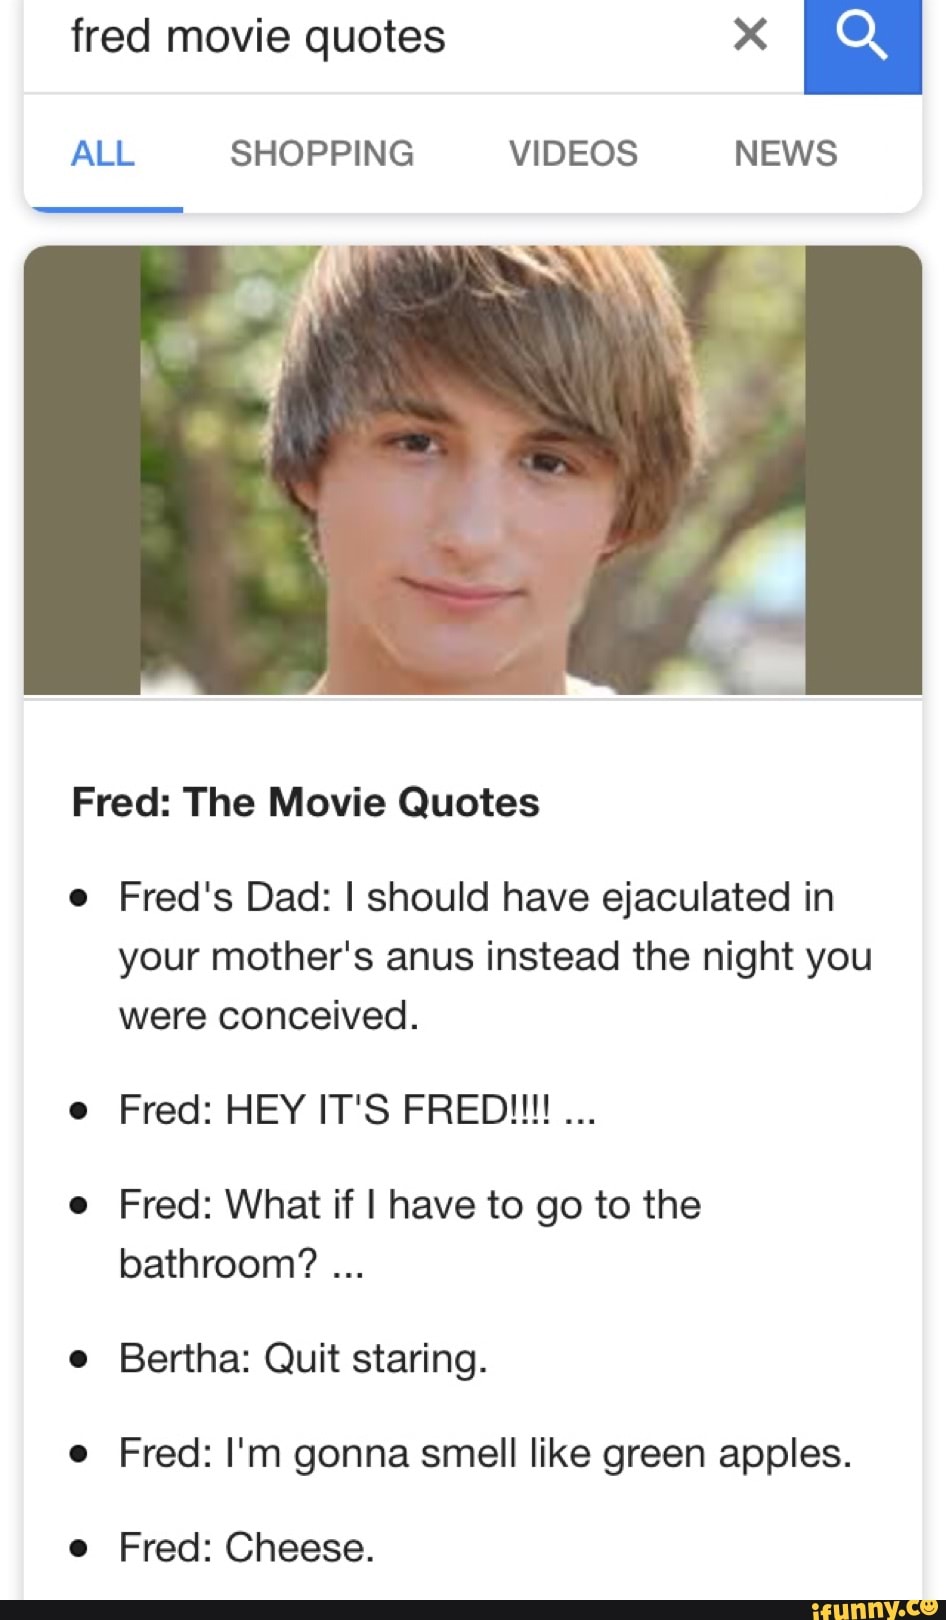 Fred The Movie Quotes Fred S Dad I Should Have Ejaculated In Your Mother S Anus Instead The Night You Were Conceived Fred Hey It S Fred Fred What If I Have To Go To